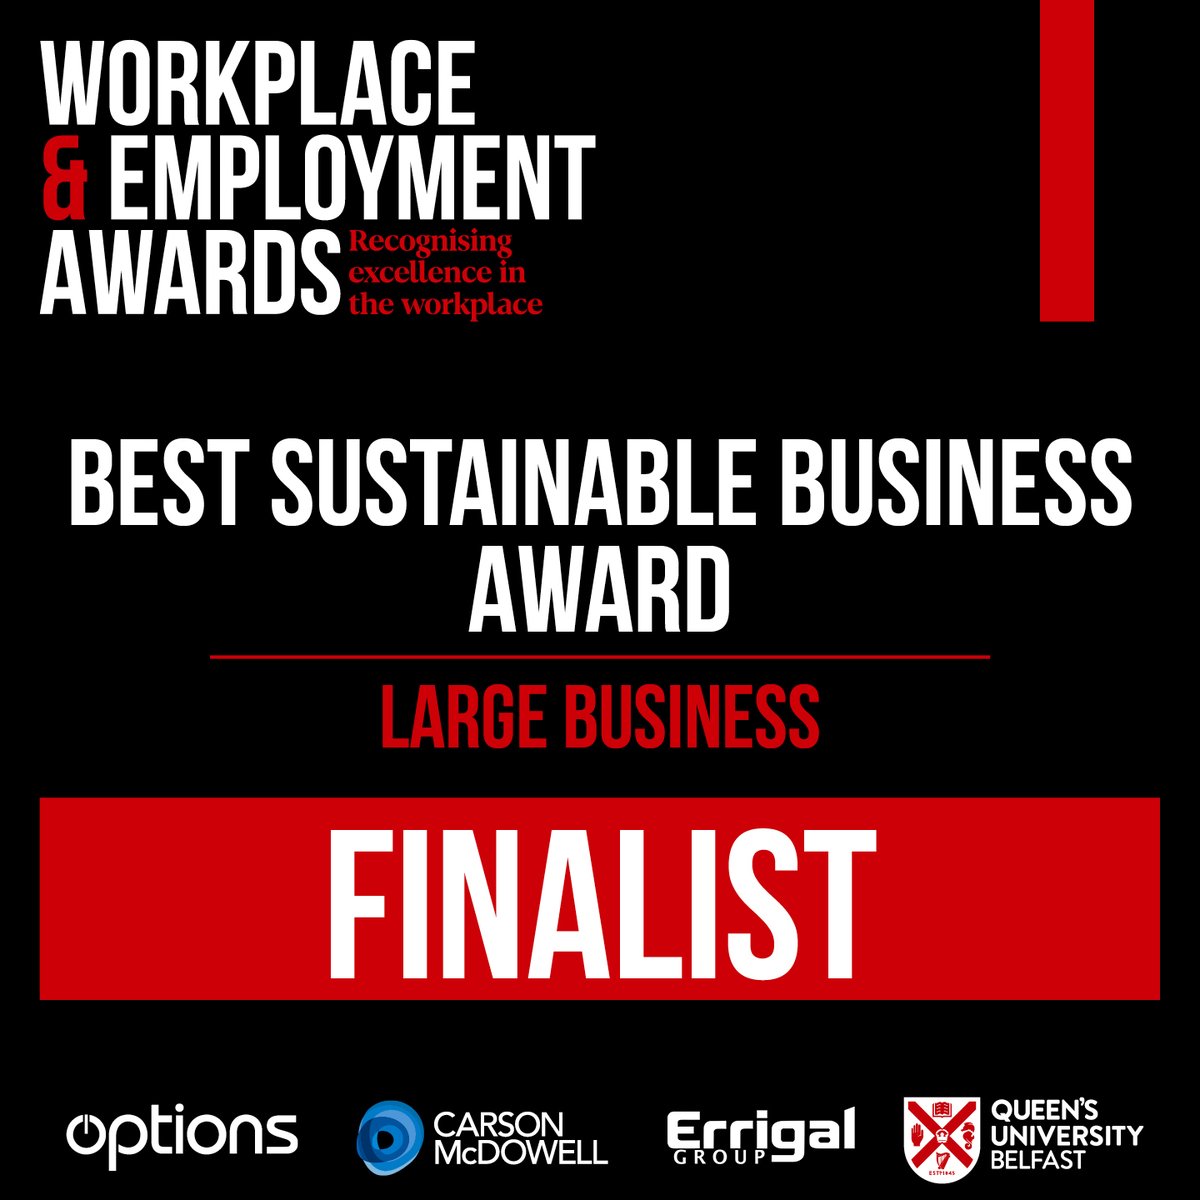 We are really pleased to be shortlisted for the 'Best Sustainable Large Business Award' at the @irish_news Workplace & Employment Awards! This nomination recognises our efforts to lower our carbon footprint and champion sustainability. #WEA24 #BusinessAwards #SustainableBusiness